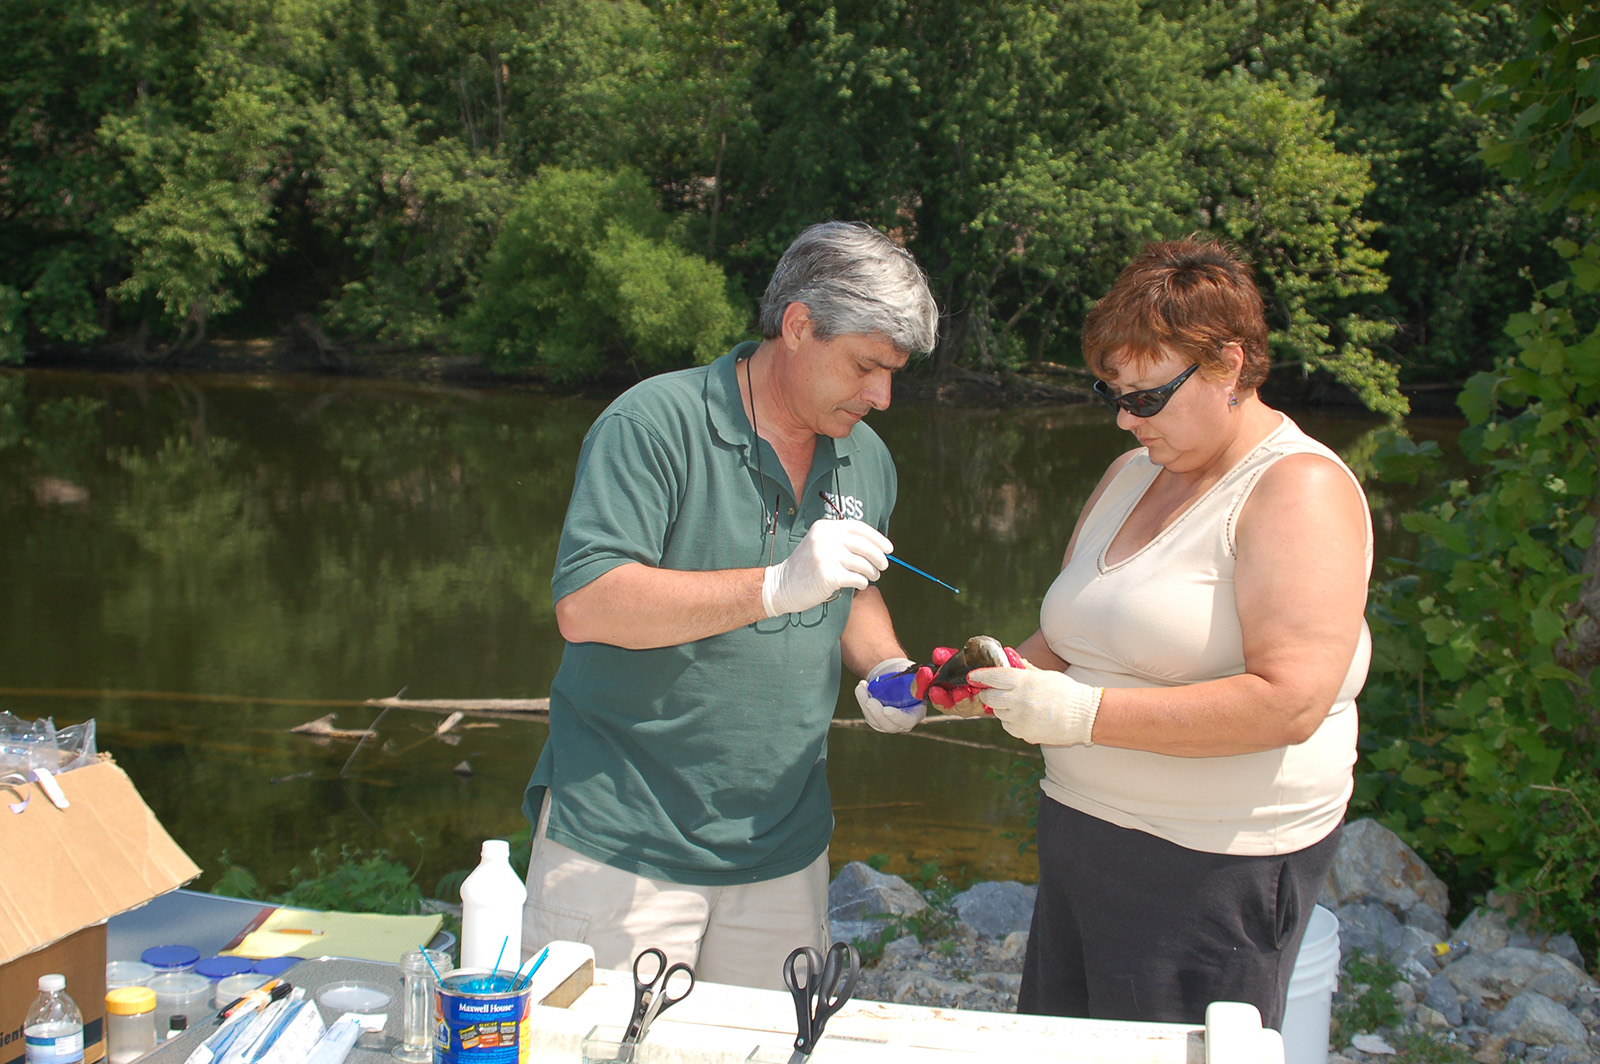 An image of DWR staff sampling health information from a fish near a river